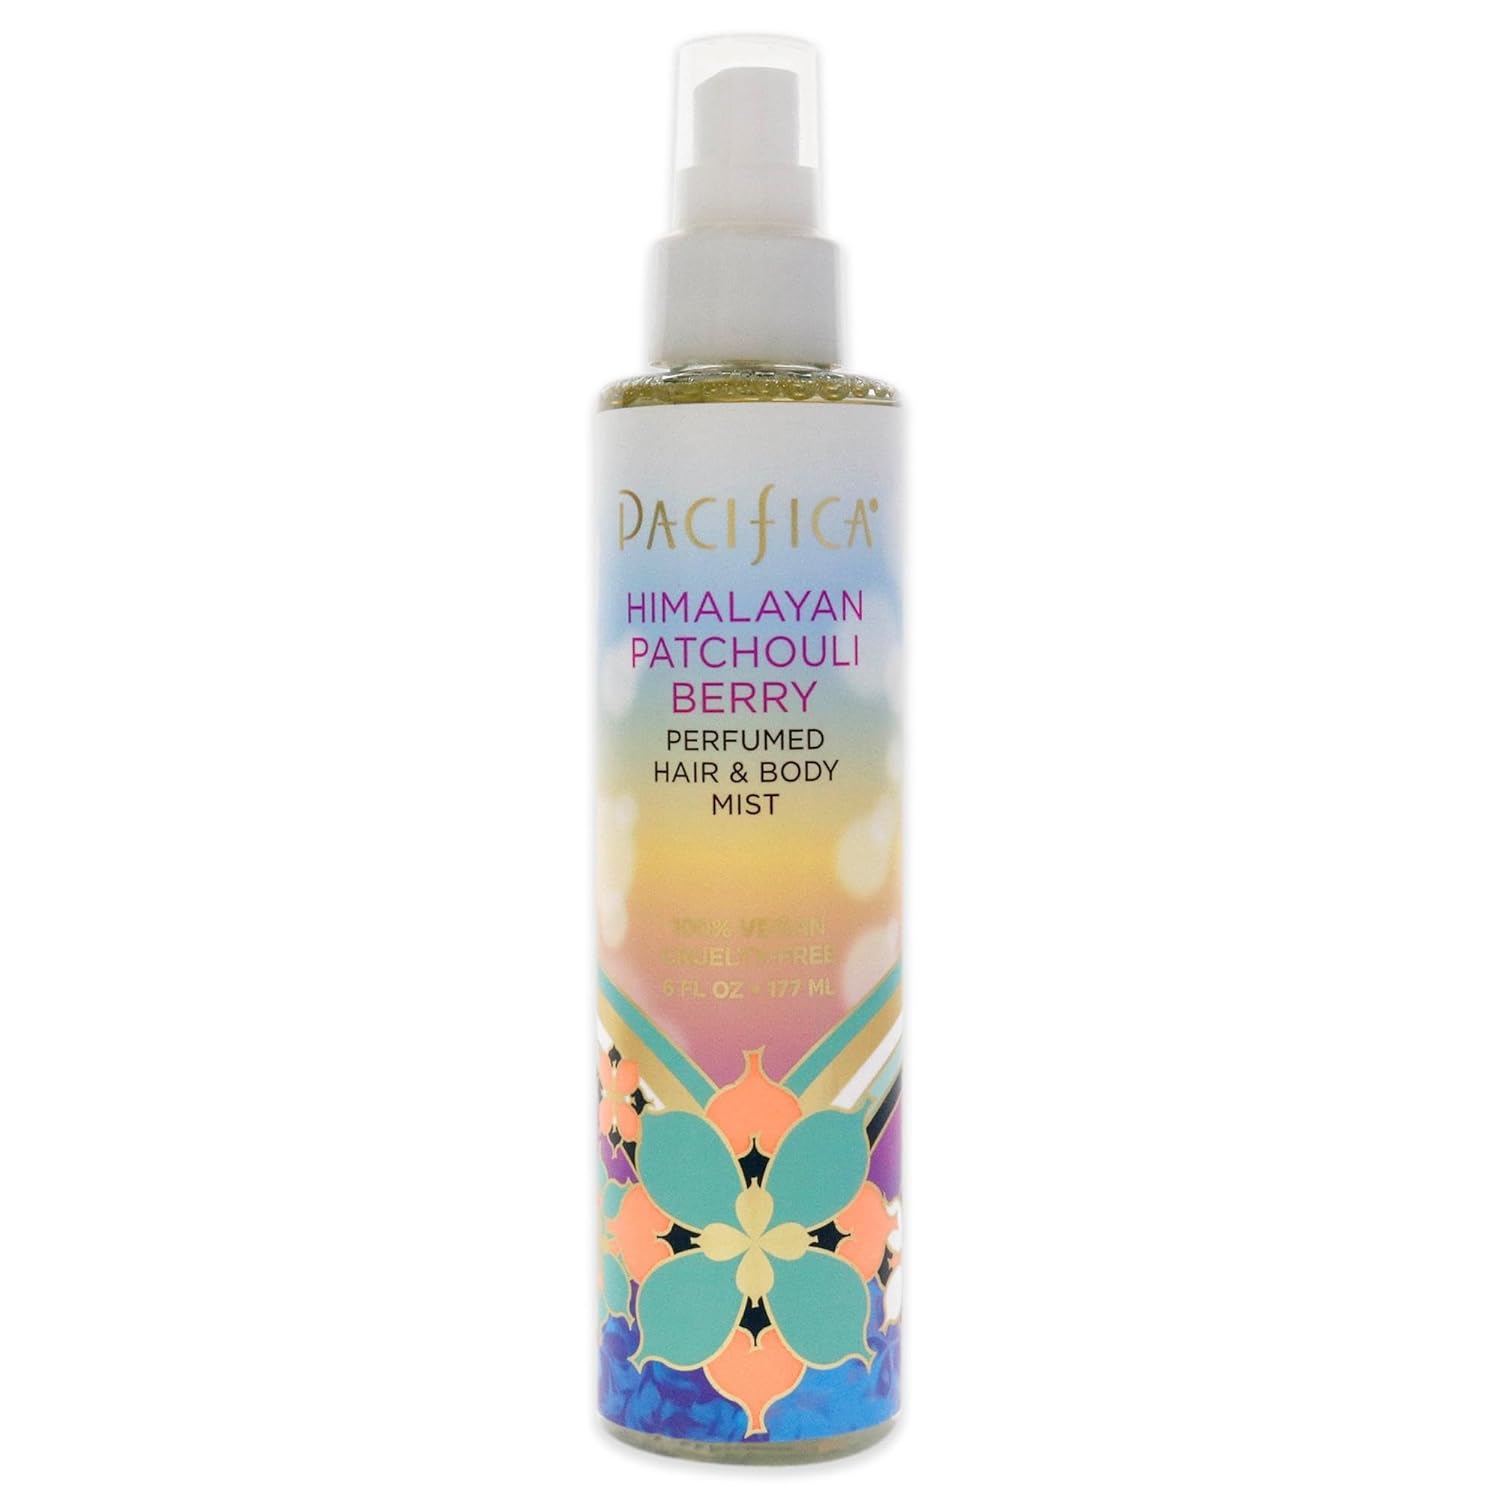 Pacifica Beauty, Himalayan Patchouli Berry Hair Perfume & Body Spray, Grapefruit + Patchouli Notes, Clean Perfume & Fragrance, Vegan & Cruelty, Phthalate, Paraben-Free